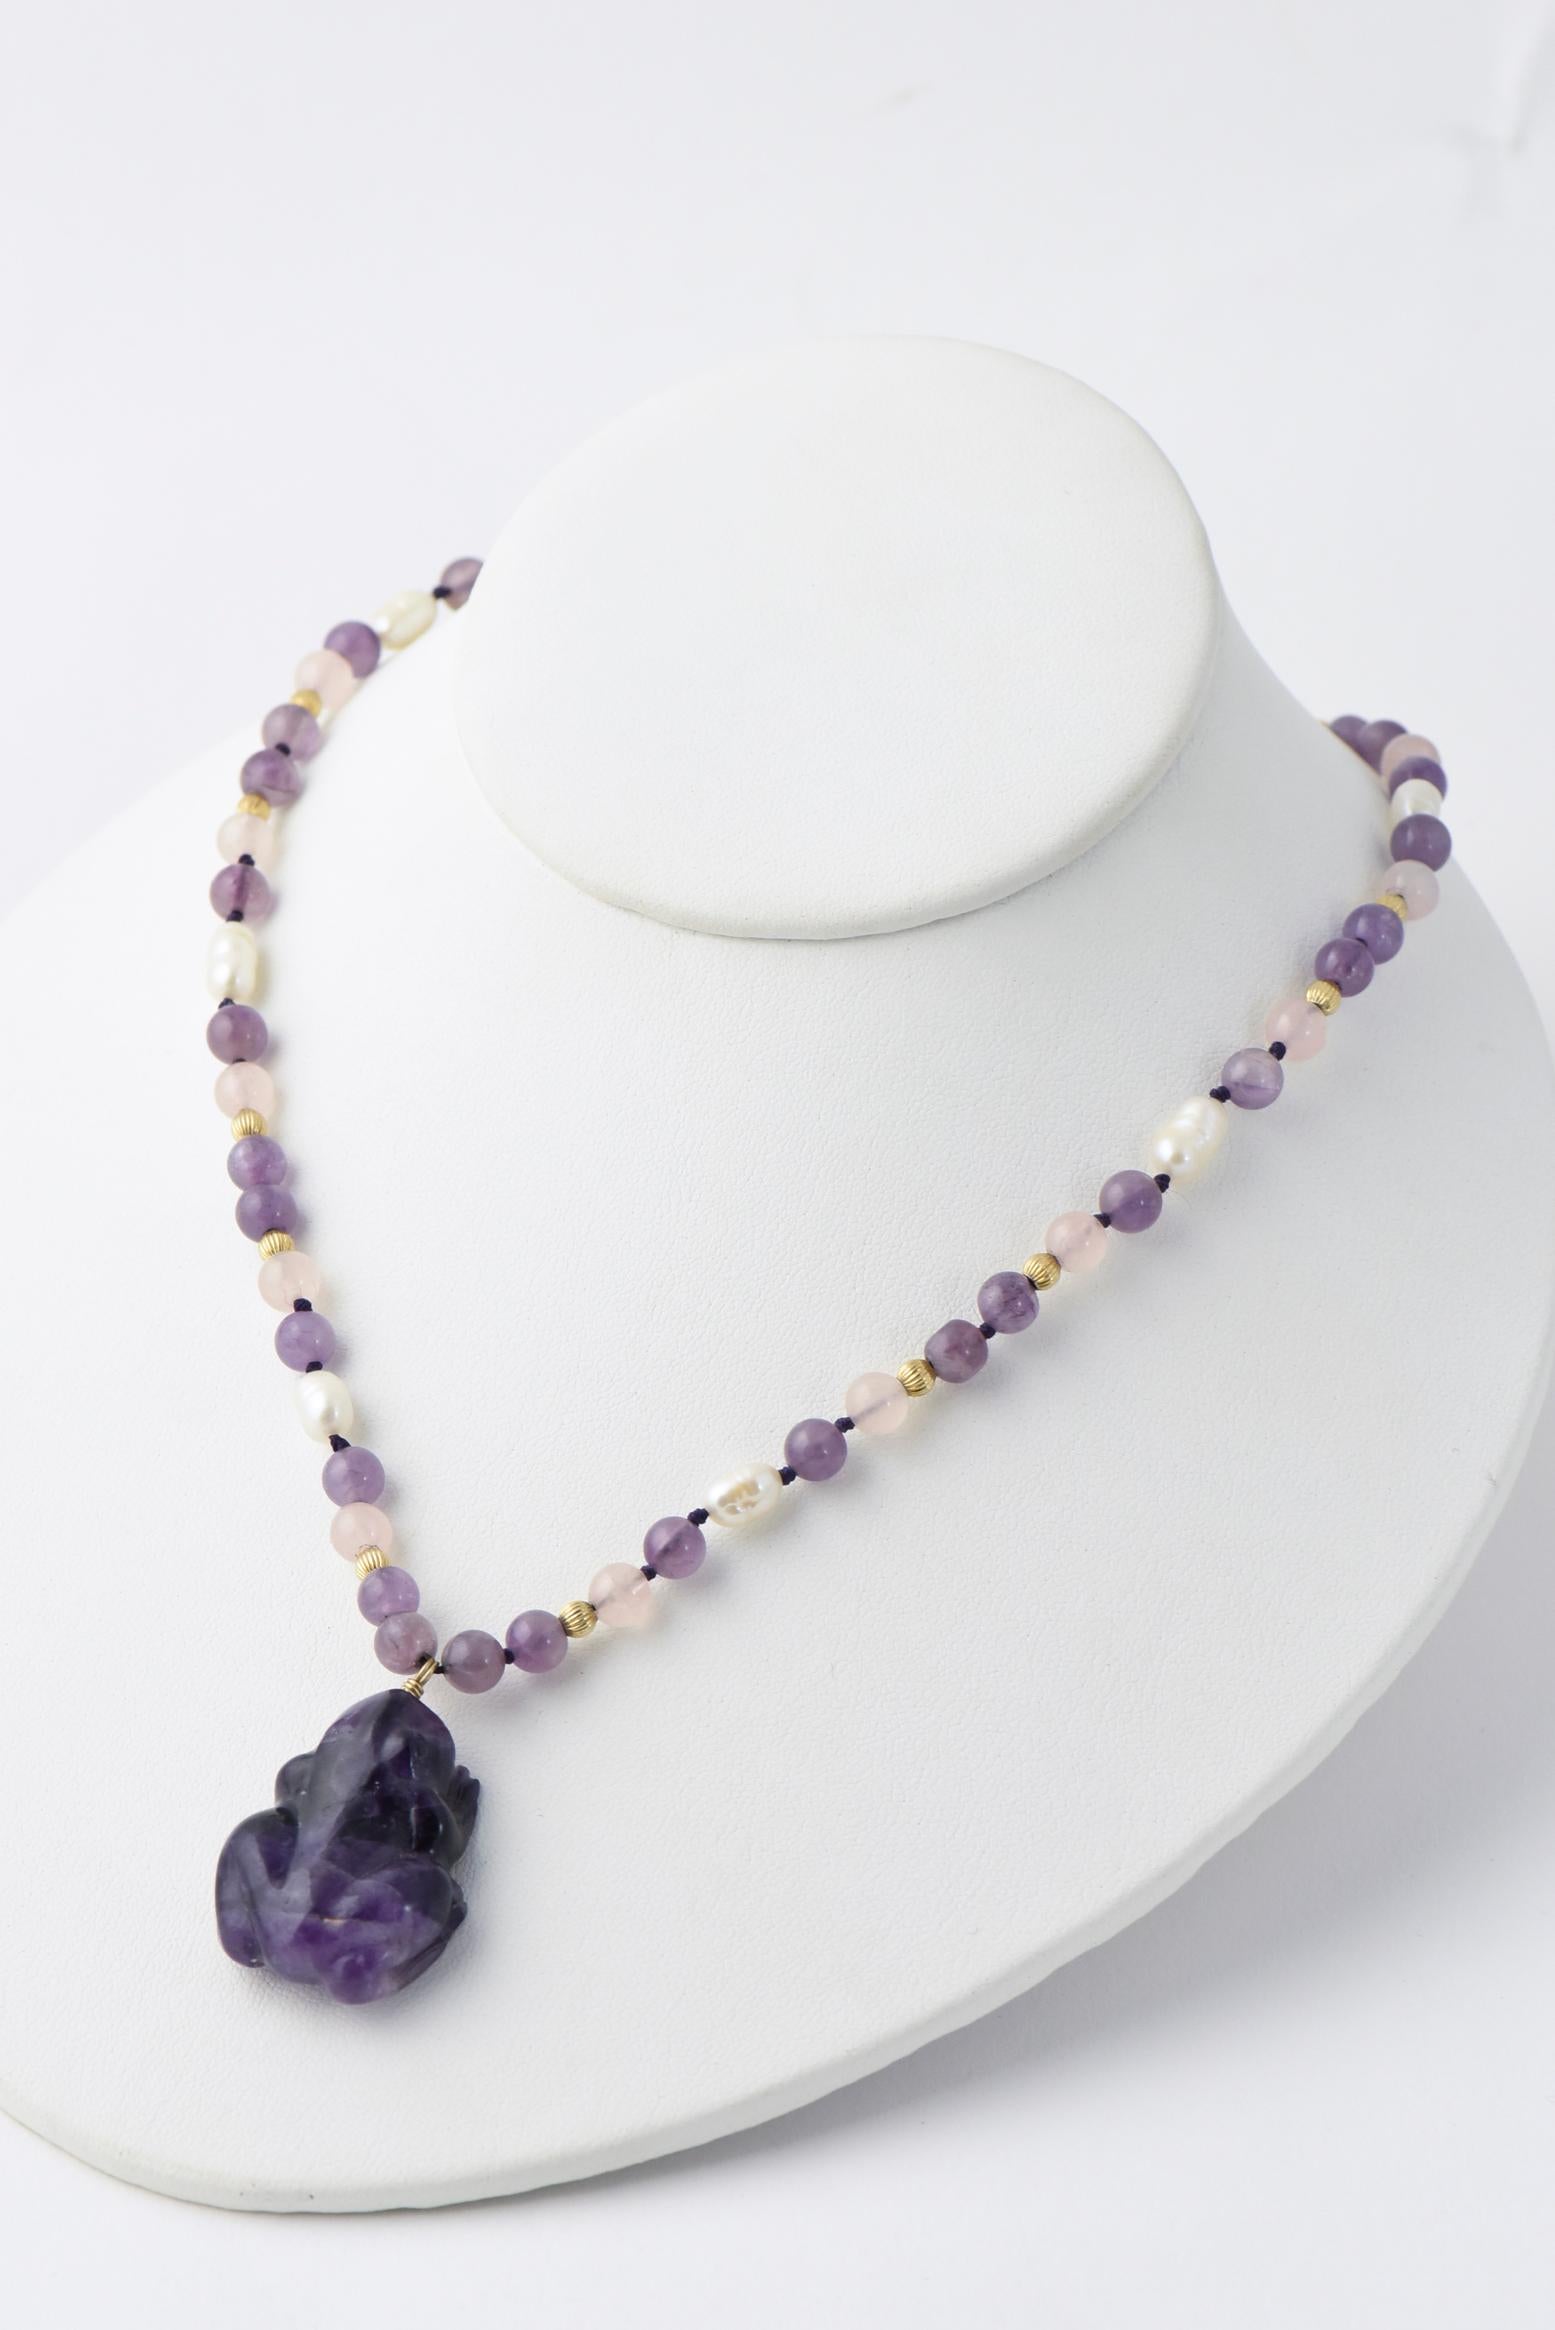 Les Bernard Amethyst and Pearl Frog Necklace In Good Condition For Sale In Miami Beach, FL